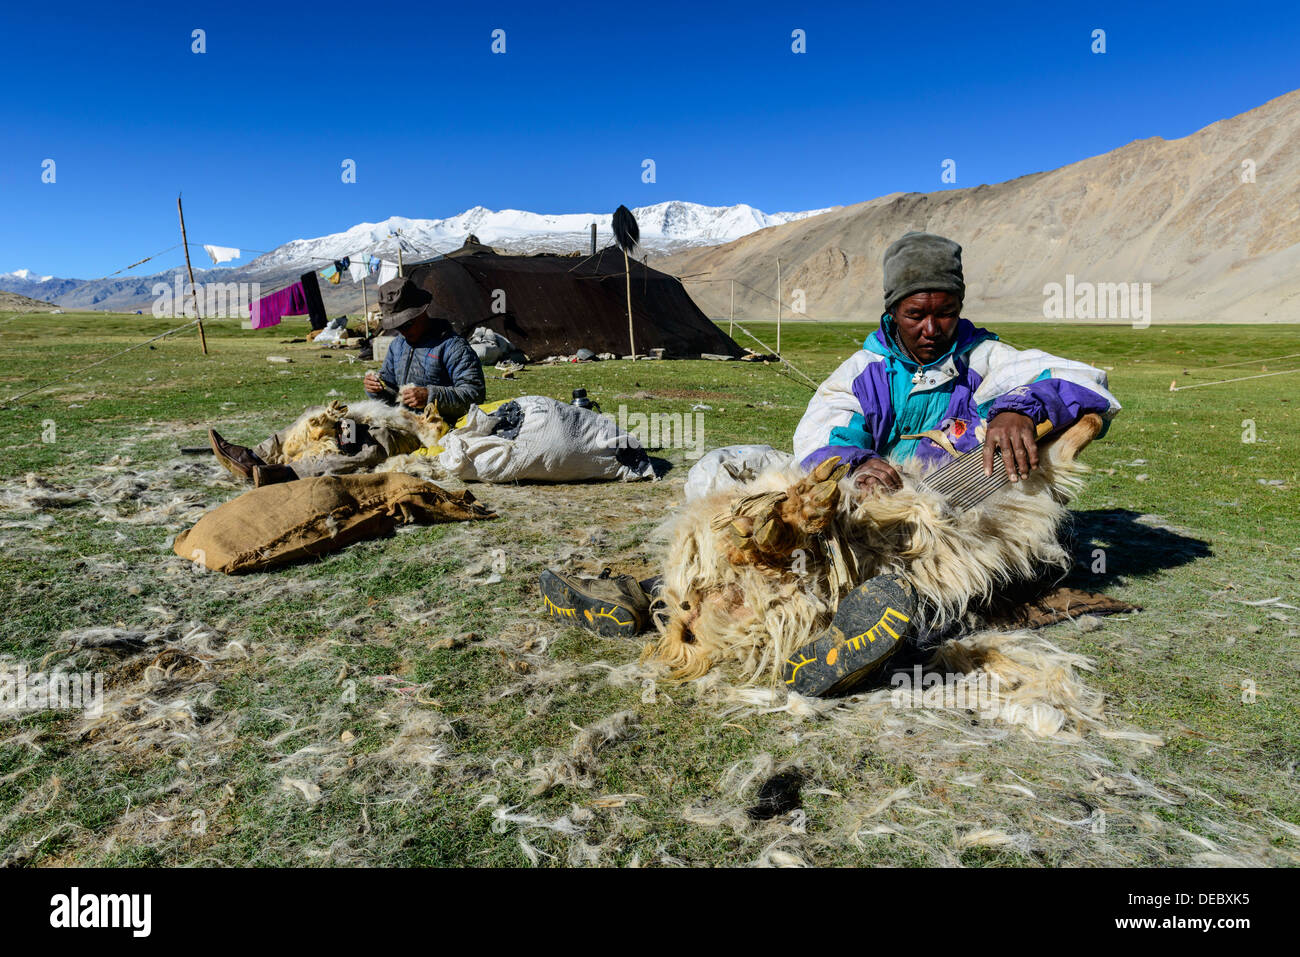 Nomad men shearing sheep in front of their tent, Korzok, Ladakh, Jammu and Kashmir, India Stock Photo